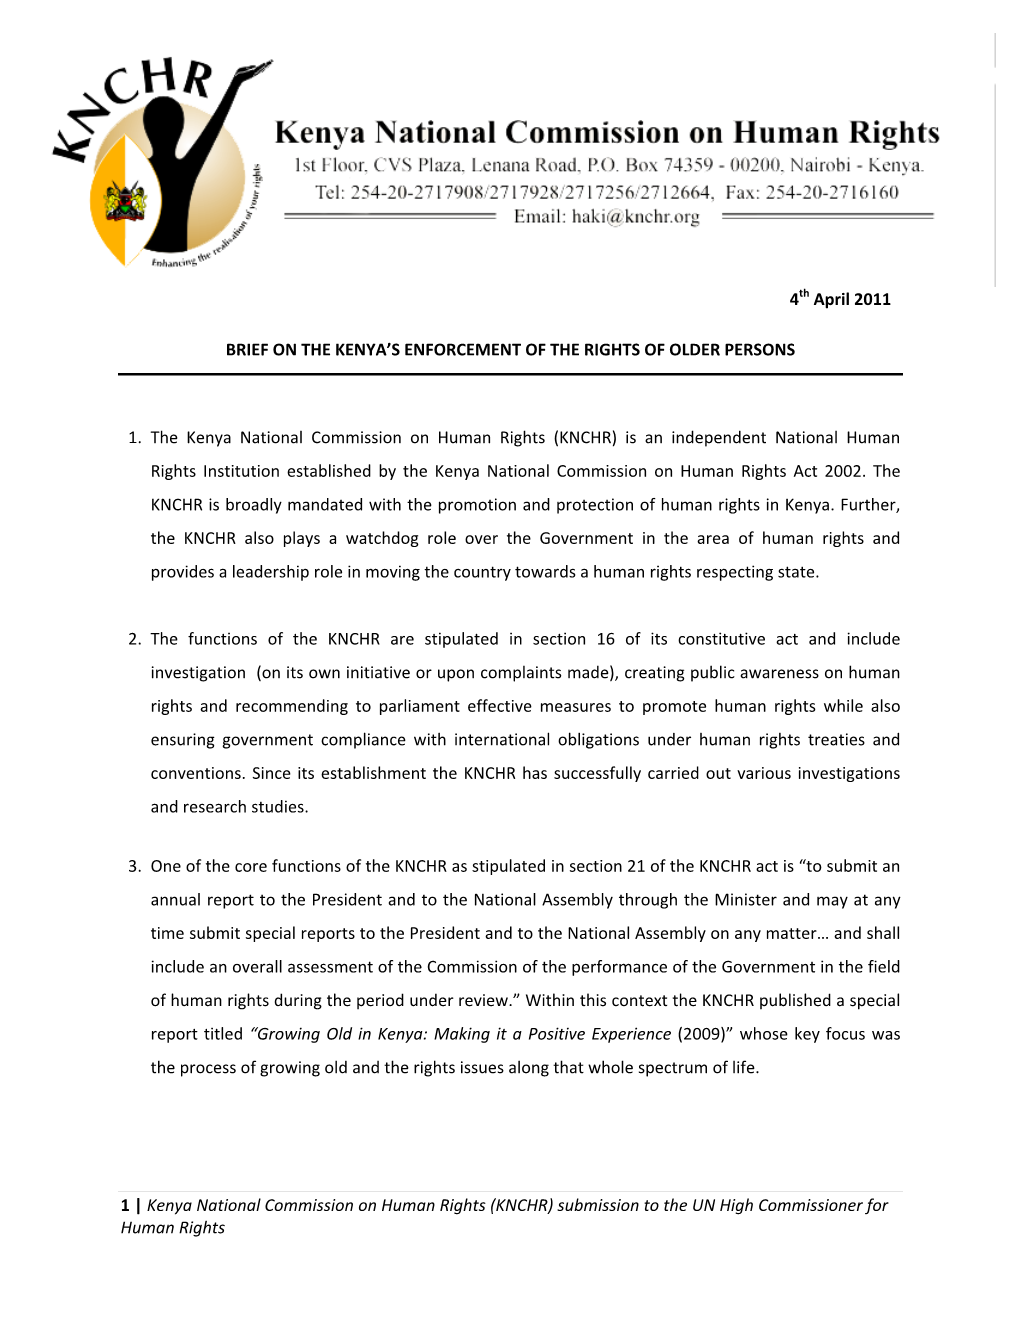 1 | Kenya National Commission on Human Rights (KNCHR) Submission to the UN High Commissioner for Human Rights